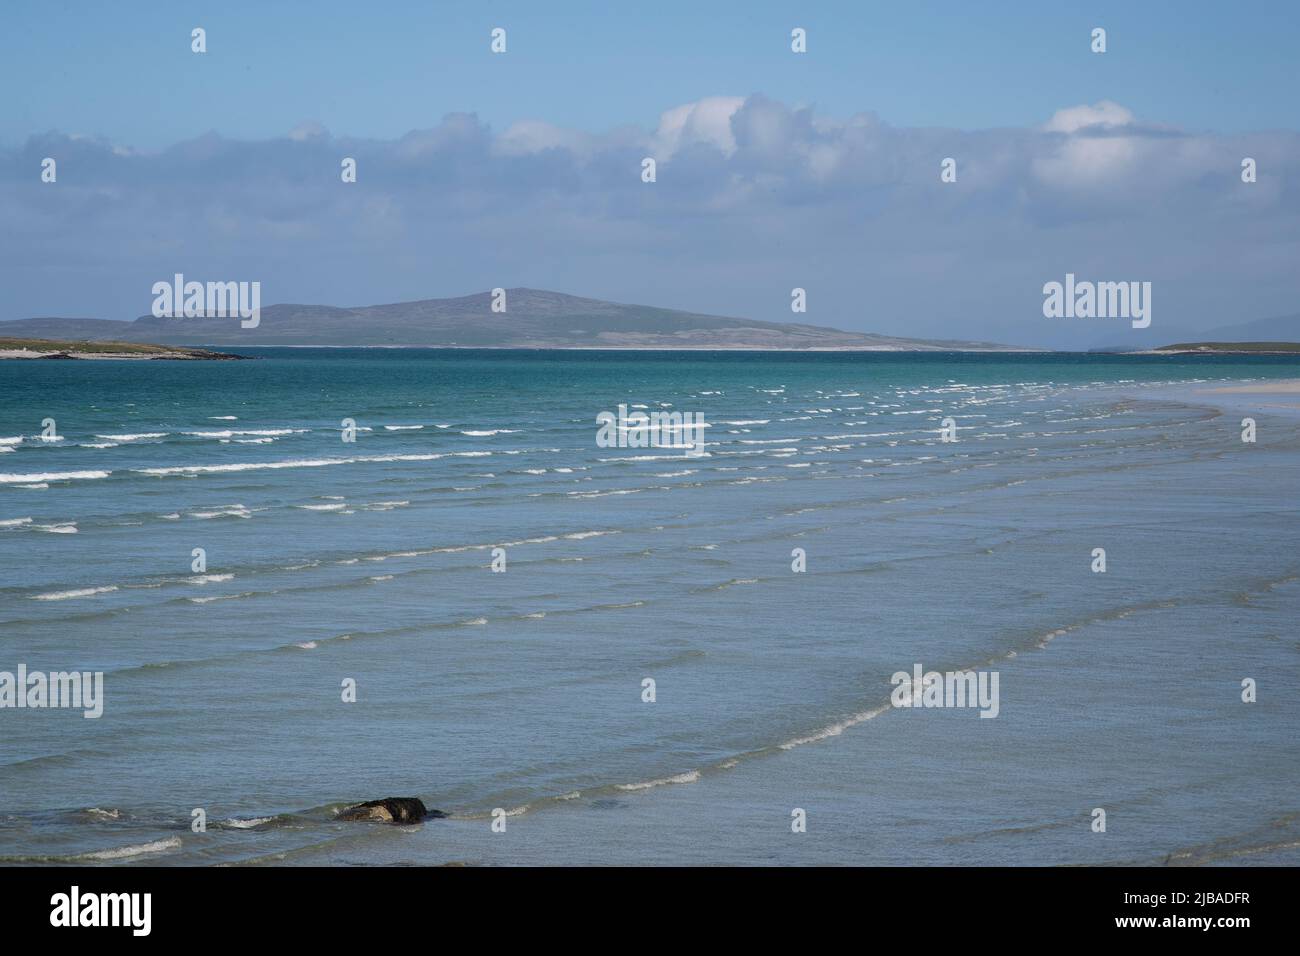 Incoming high tide at Clachan Sands, North Uist, Outer Hebrides, Scotland Stock Photo